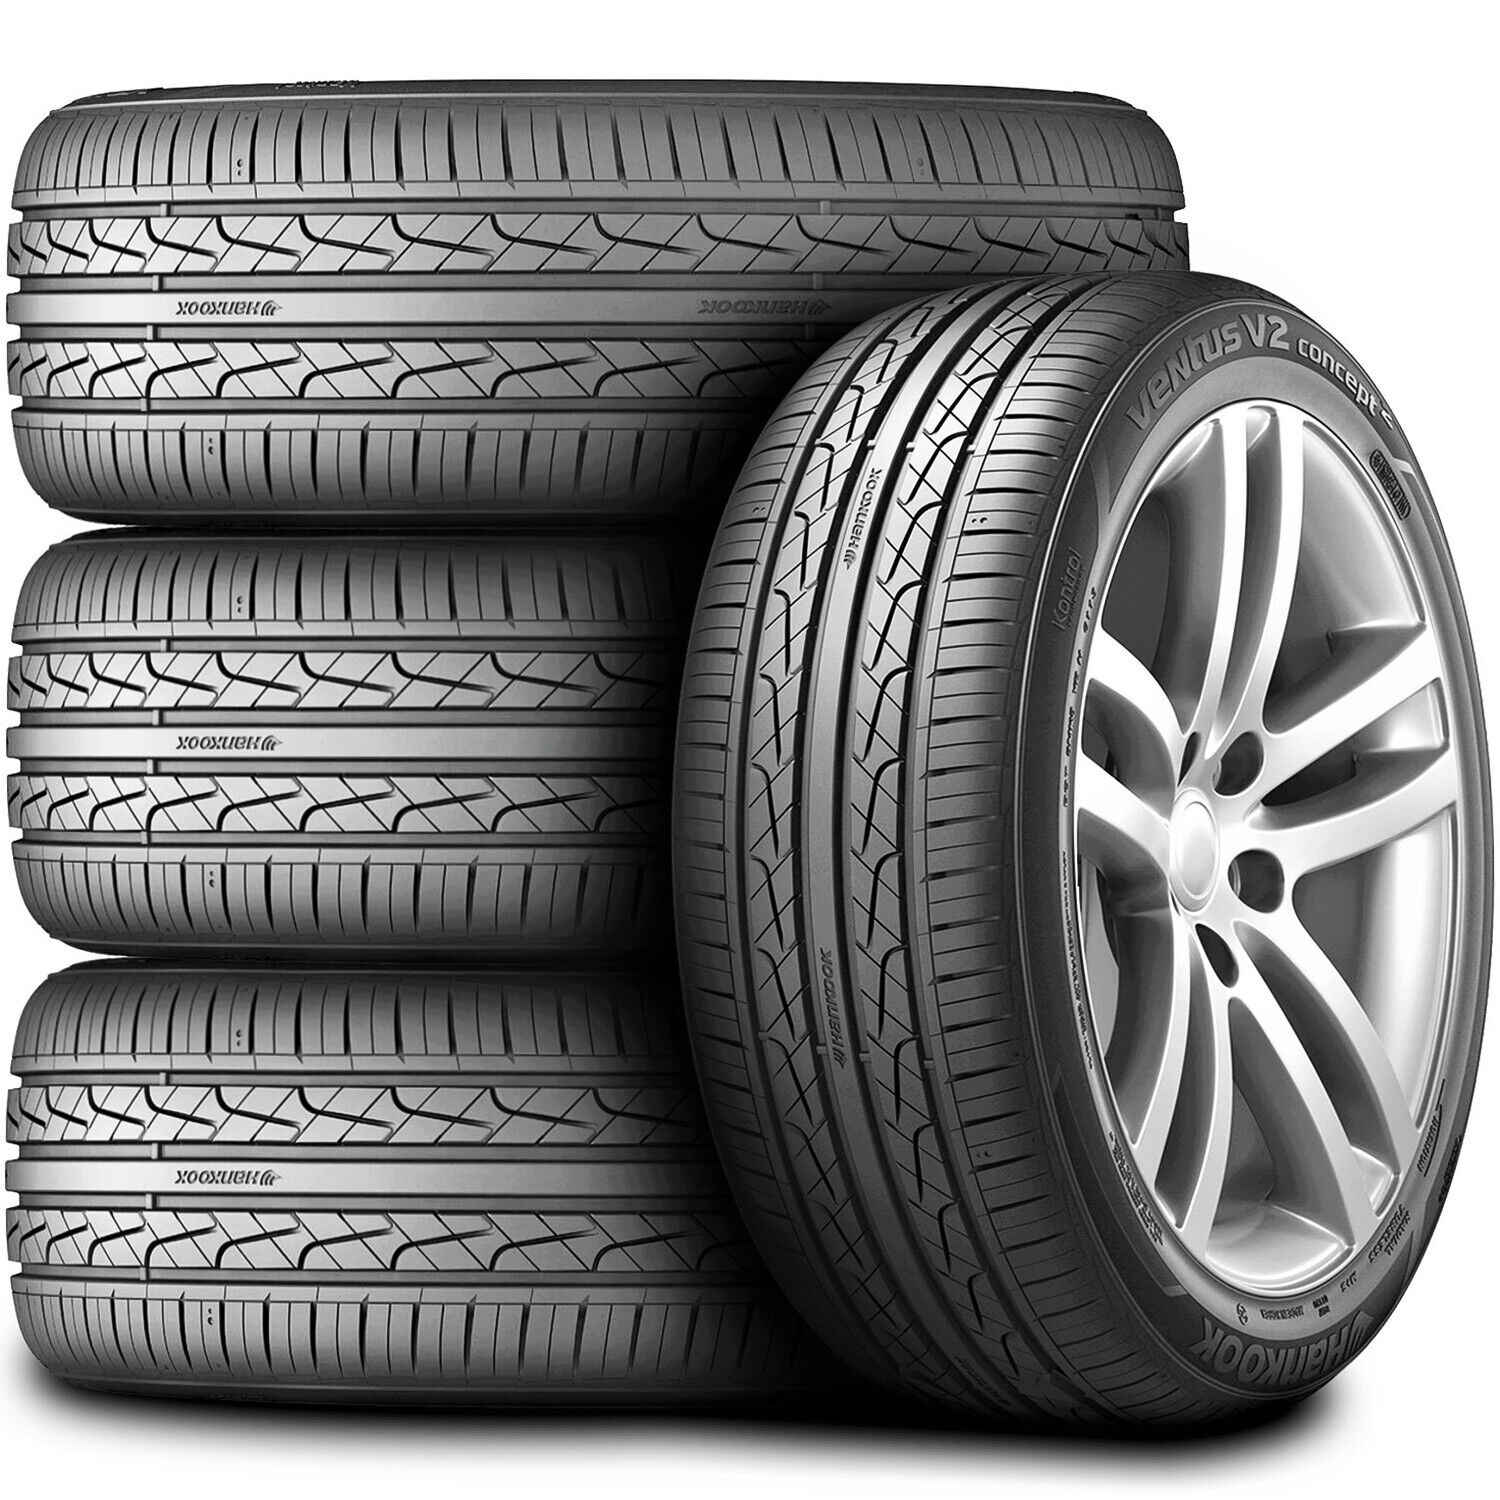 4 Tires Hankook Ventus V2 Concept2 215/55R17 94W AS A/S High Performance